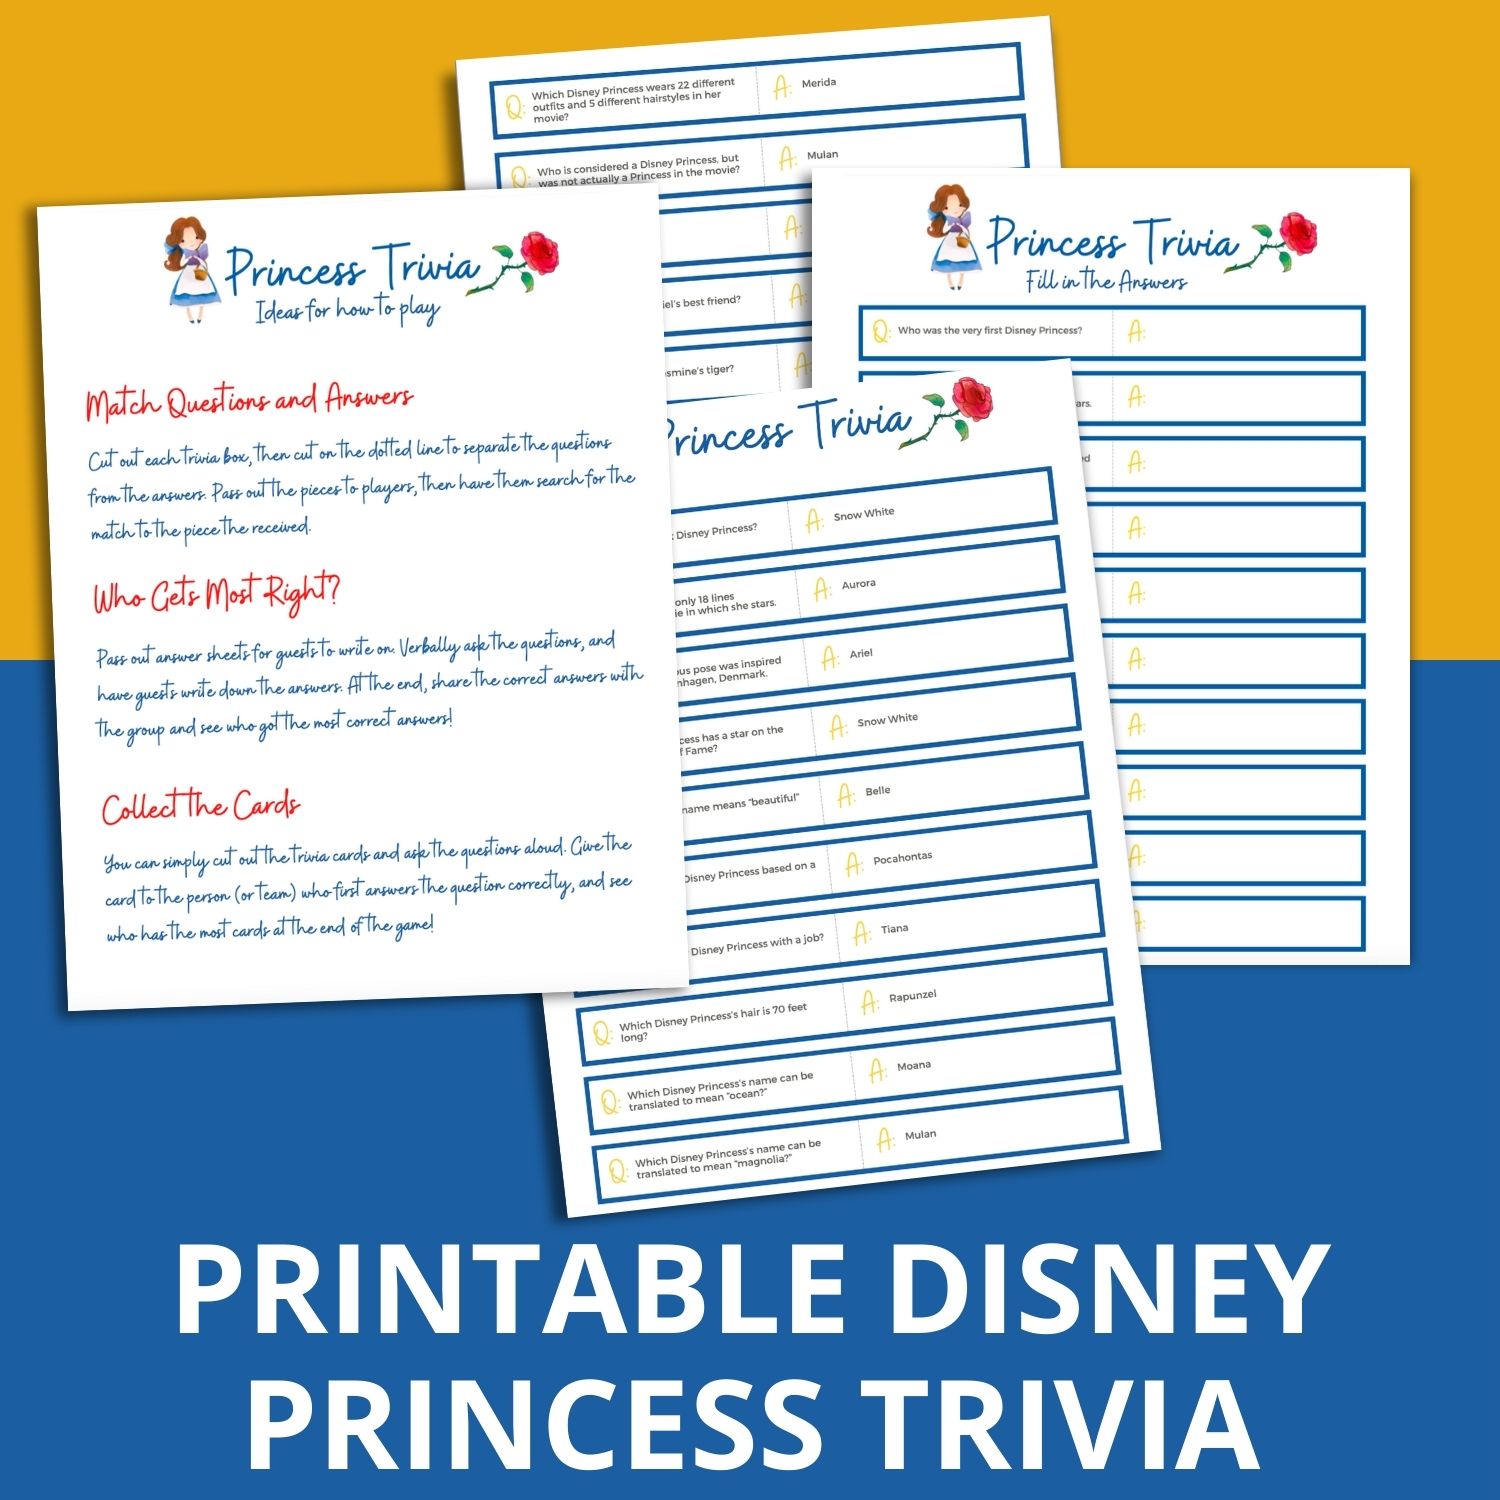 mockup image showing pages of the Disney Princess trivia questions that can be printed out